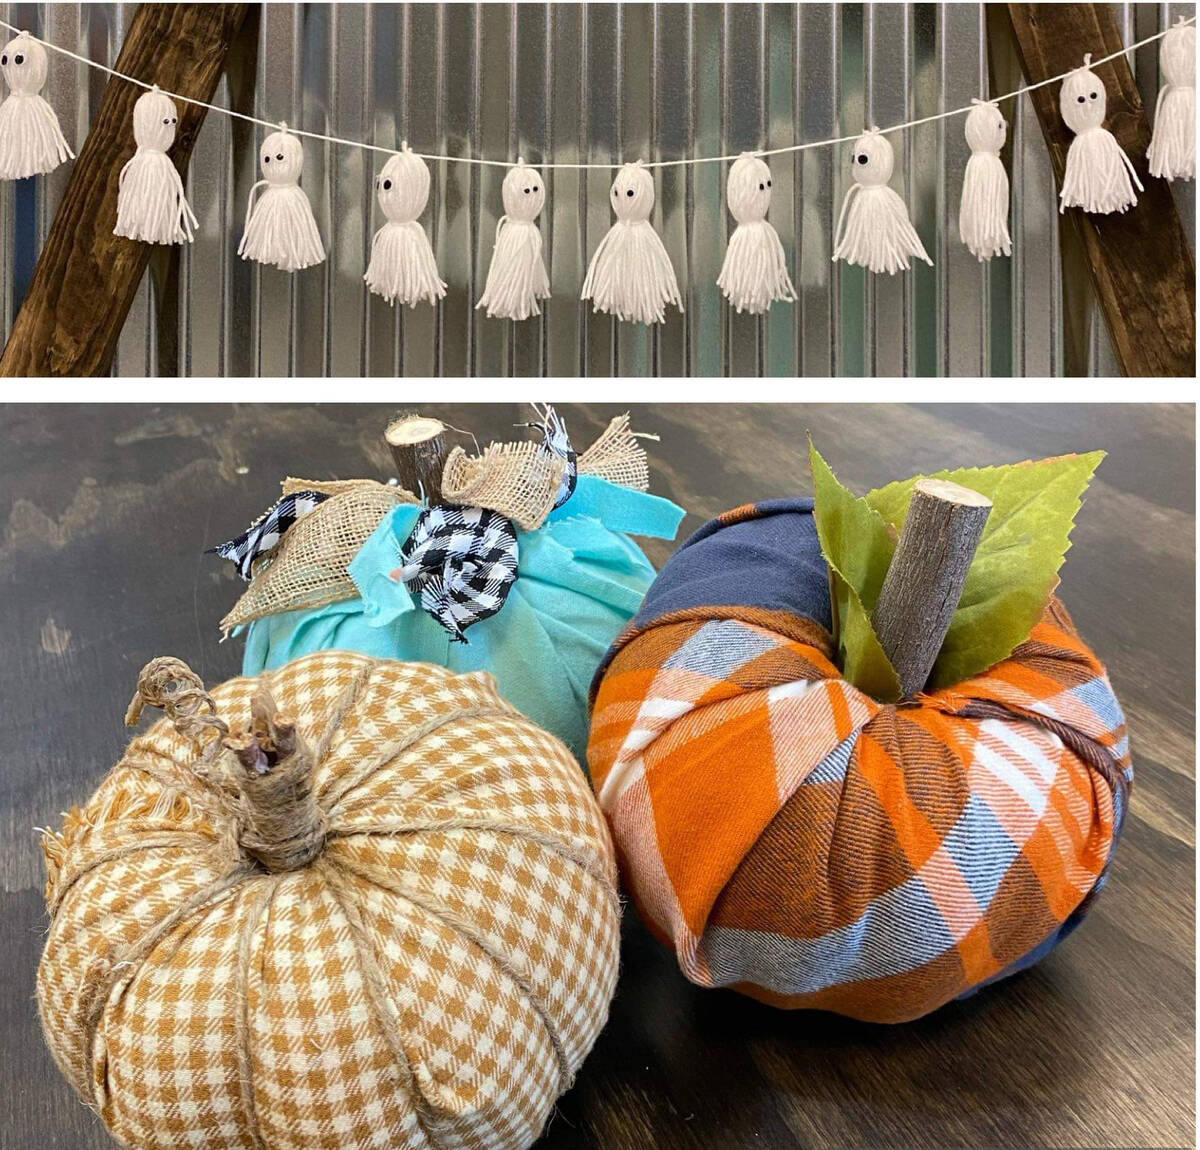 Avoid the chaos and mess of carving a pumpkin by giving it a fabric wrap, said Jewel Juachon, o ...